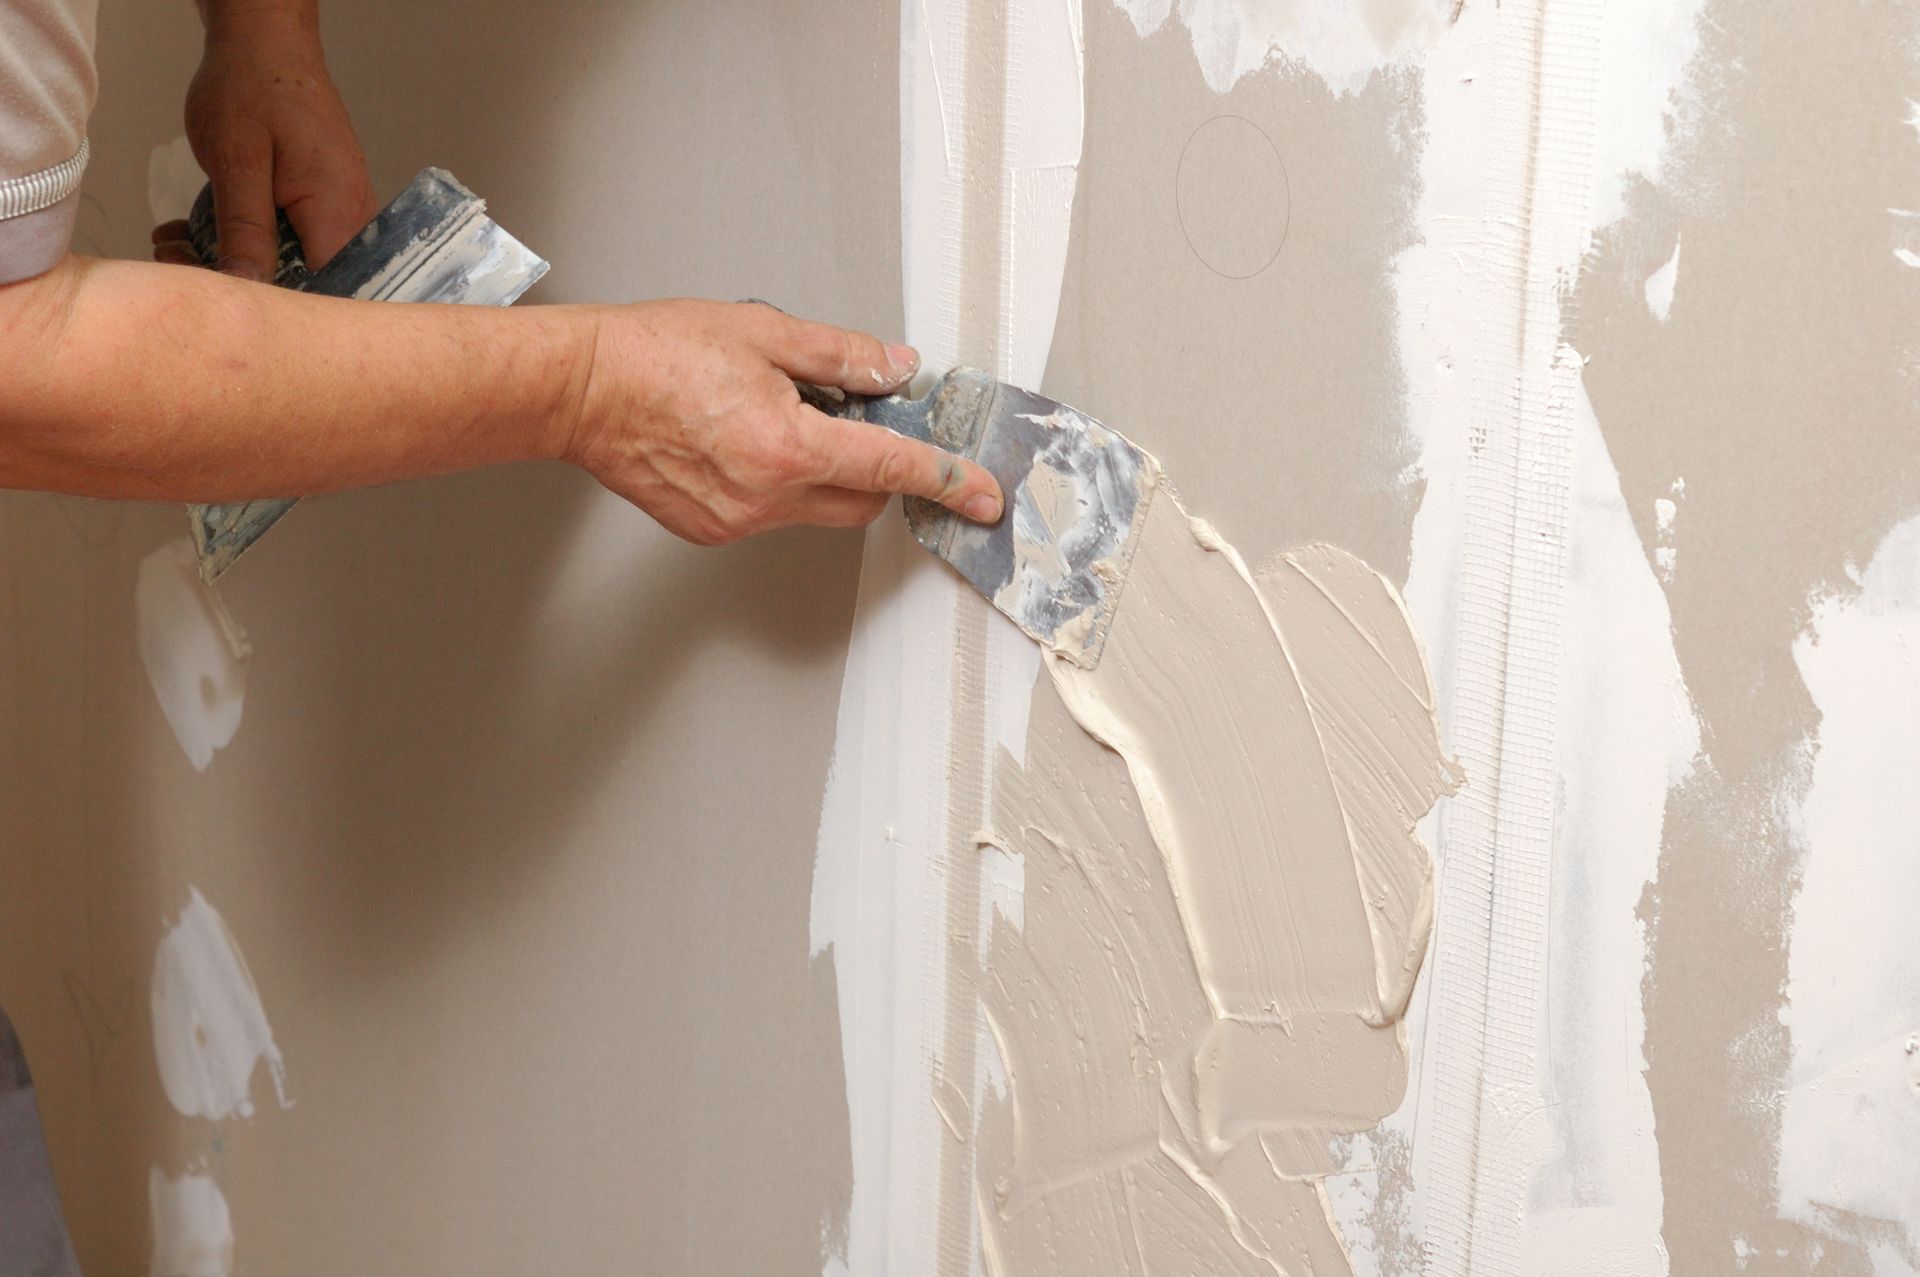 A person repairing sheetrock on a wall during a home improvement project using a putty knife to apply joint compound to the damaged area.